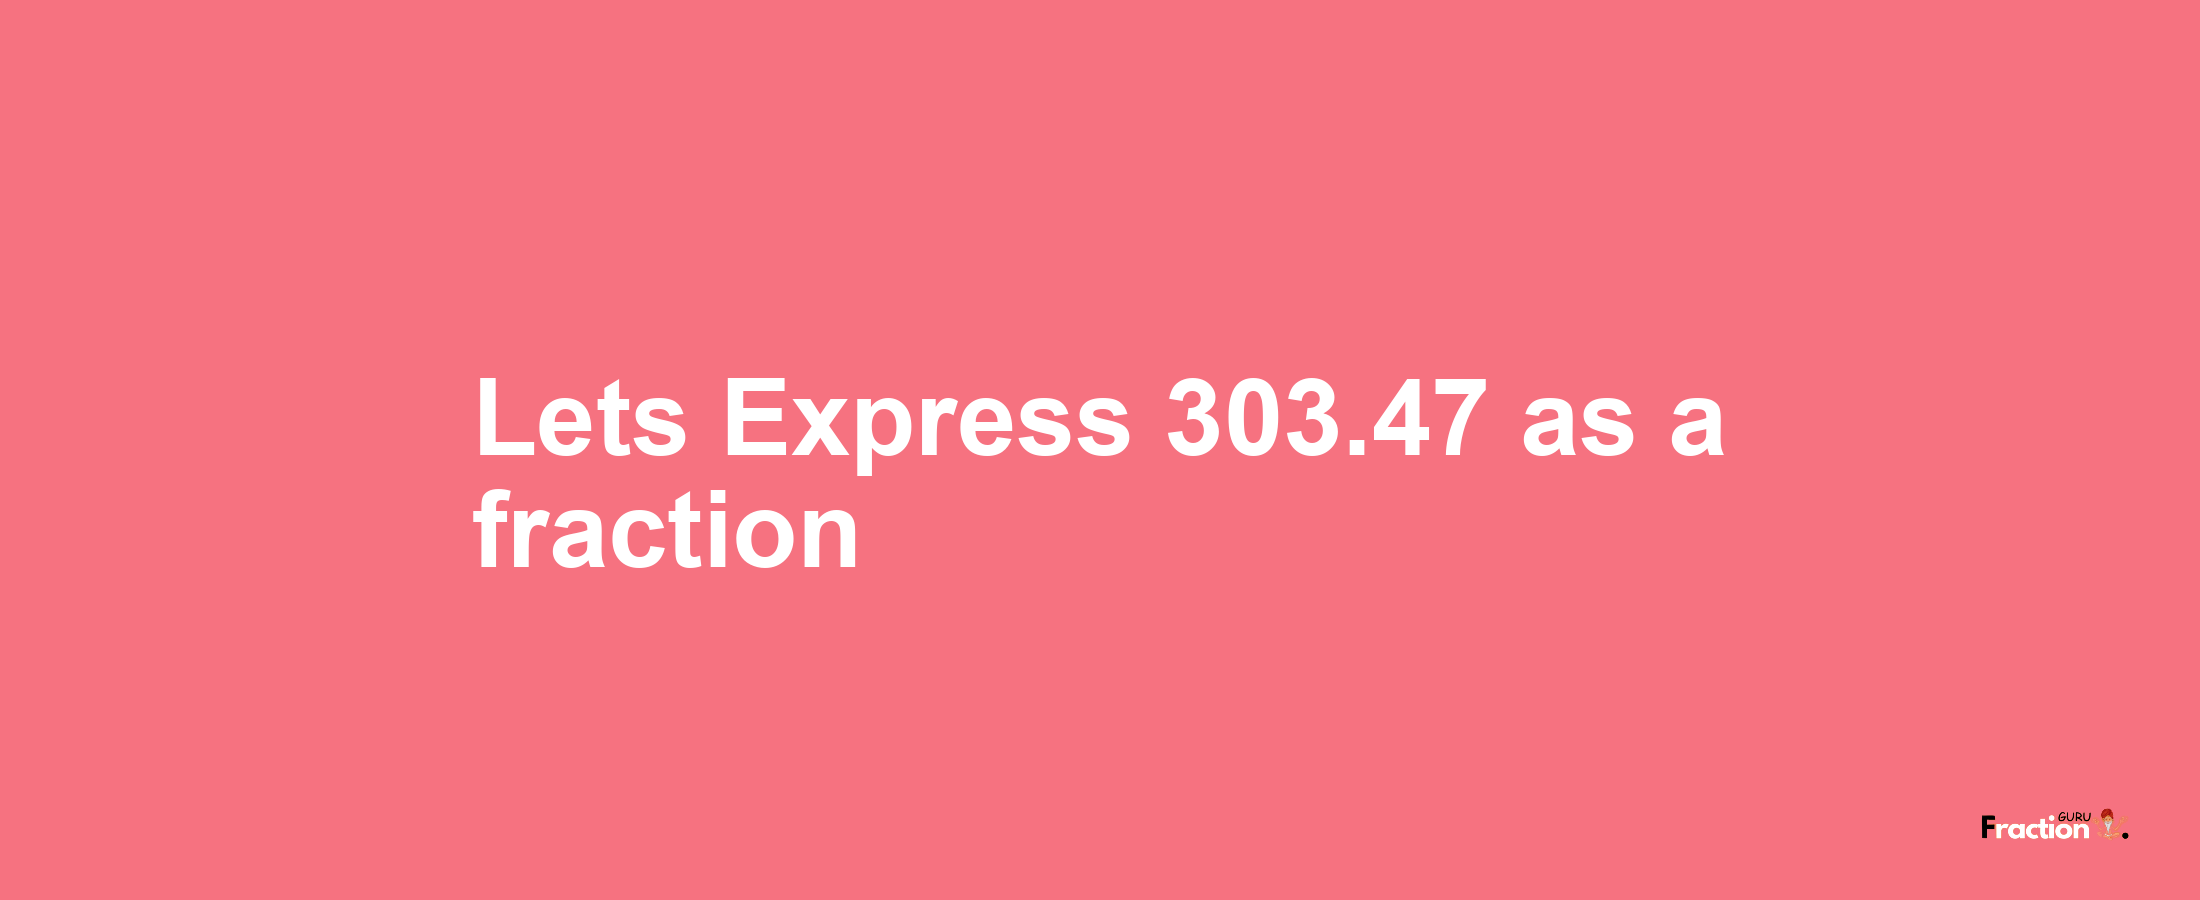 Lets Express 303.47 as afraction